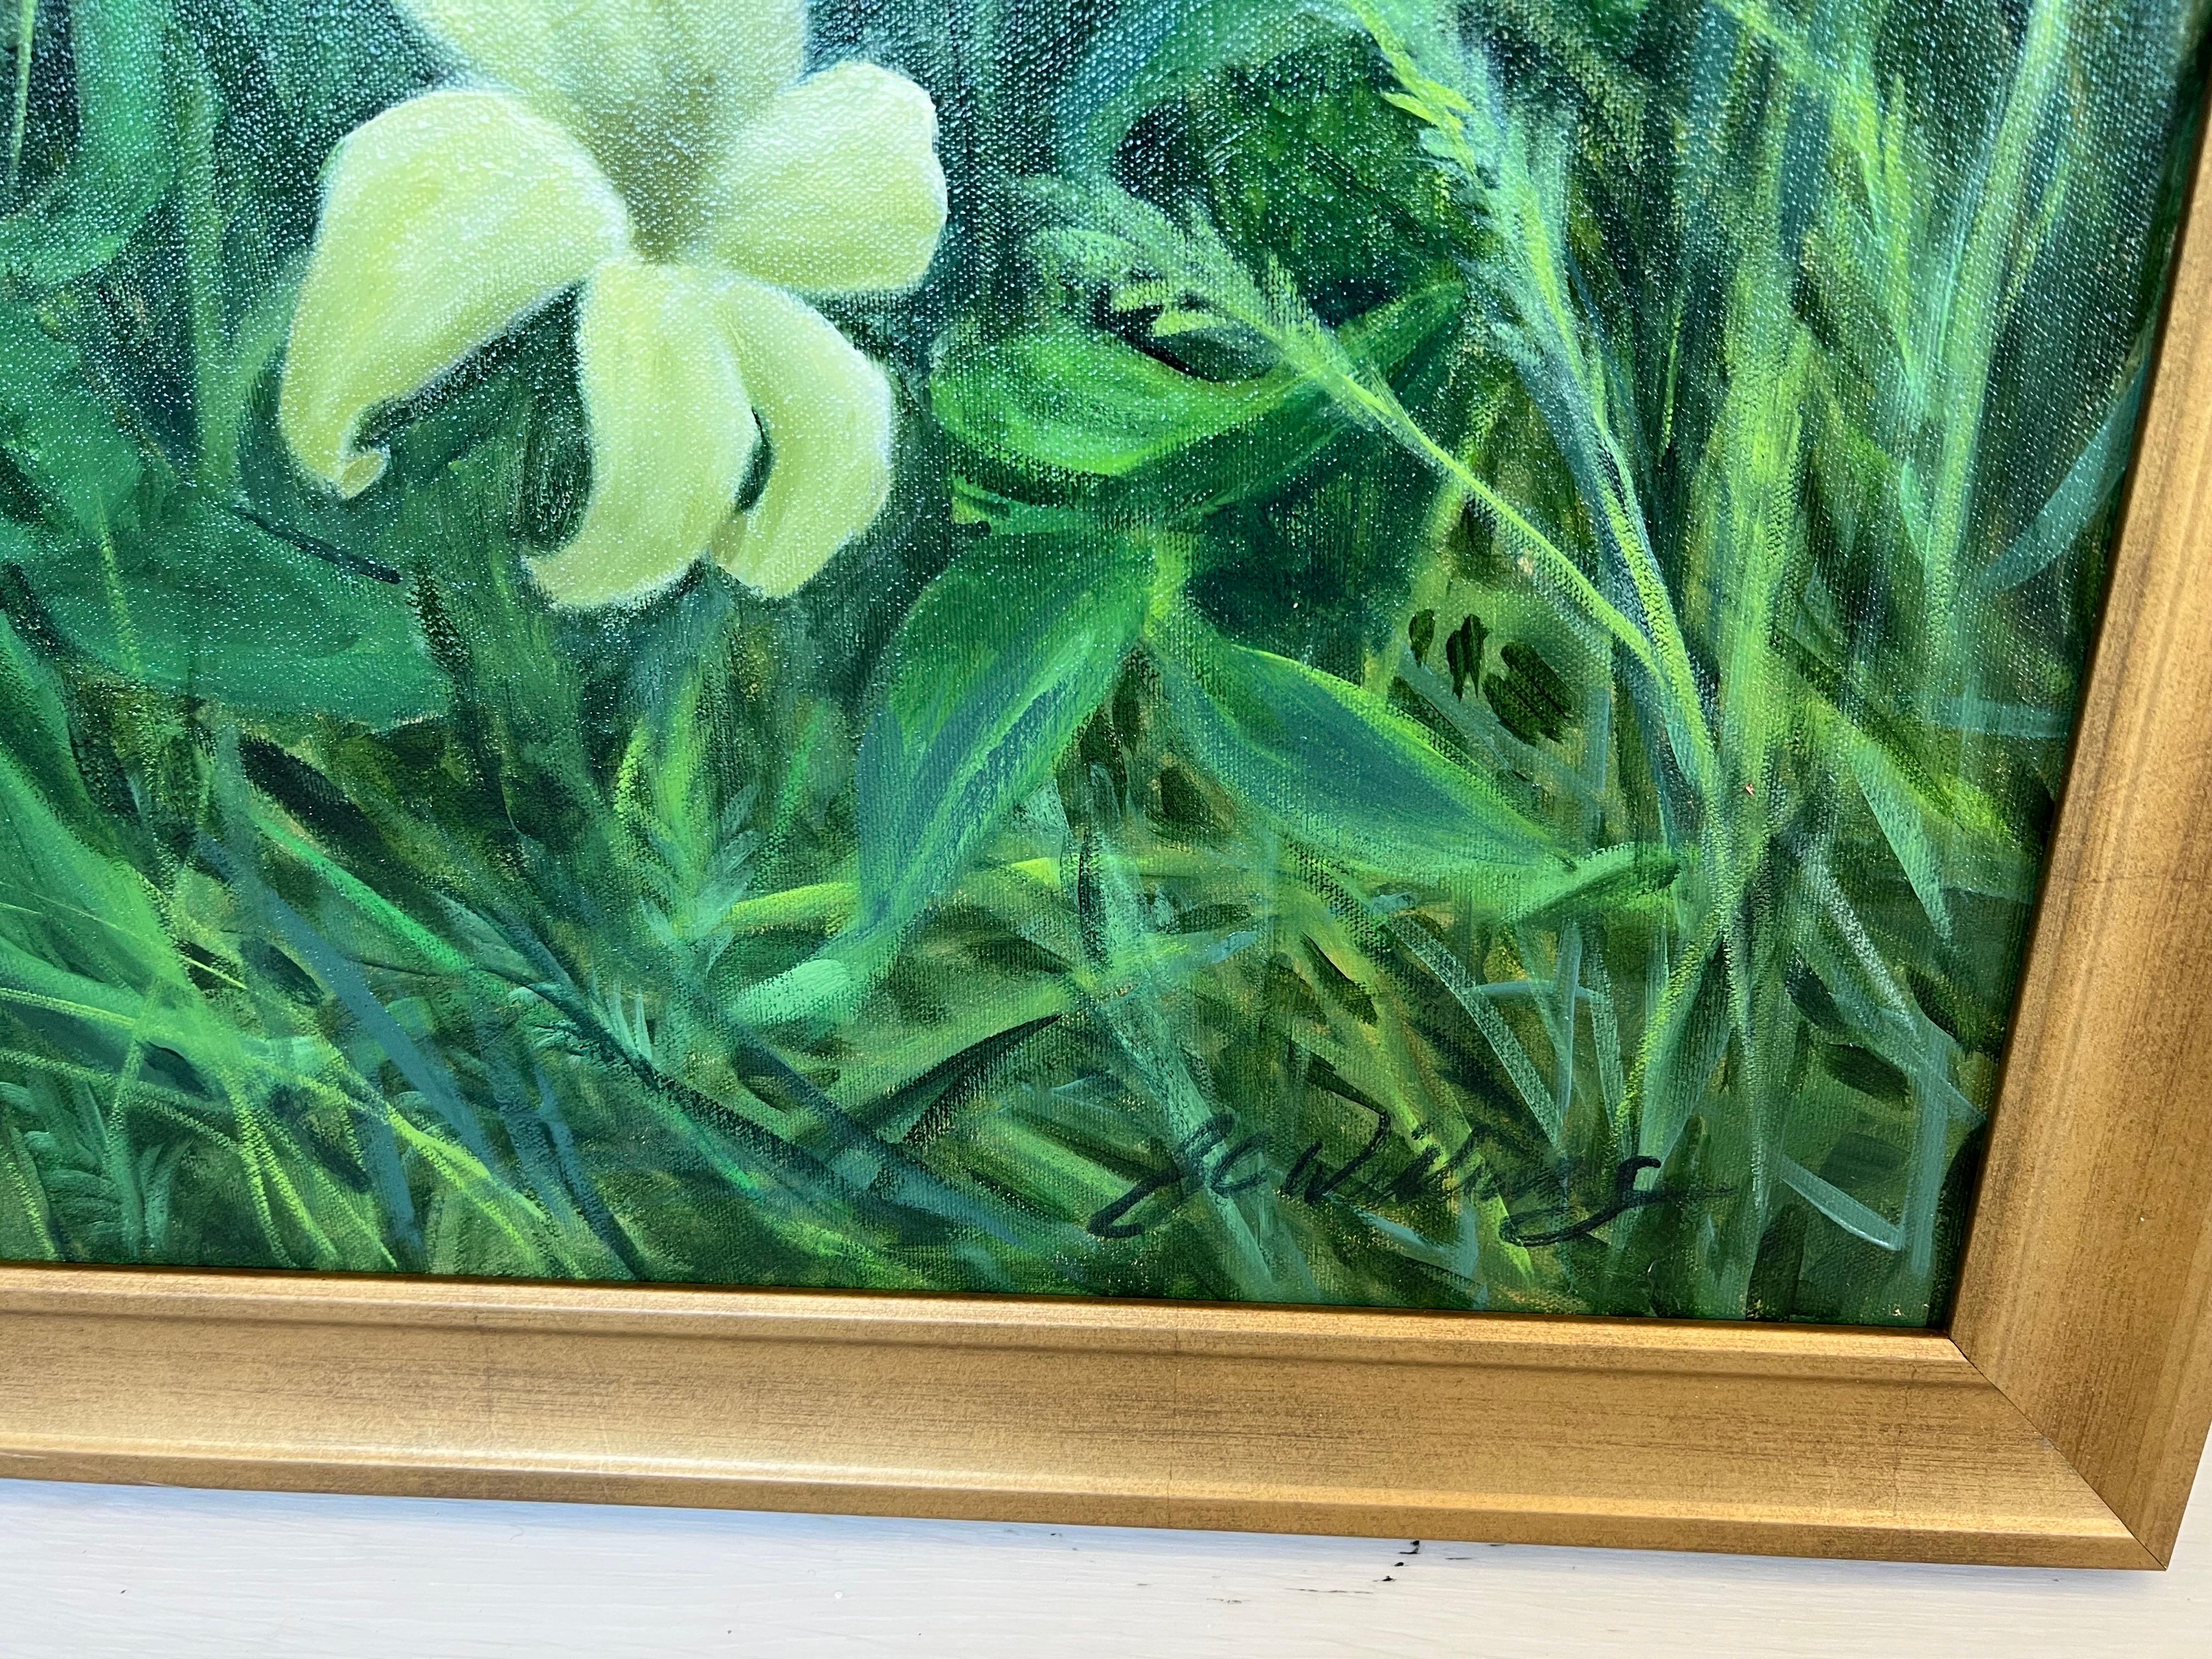 Lillies Among the Weeds by Ginny Williams Framed Still Life Oil on Canvas 3